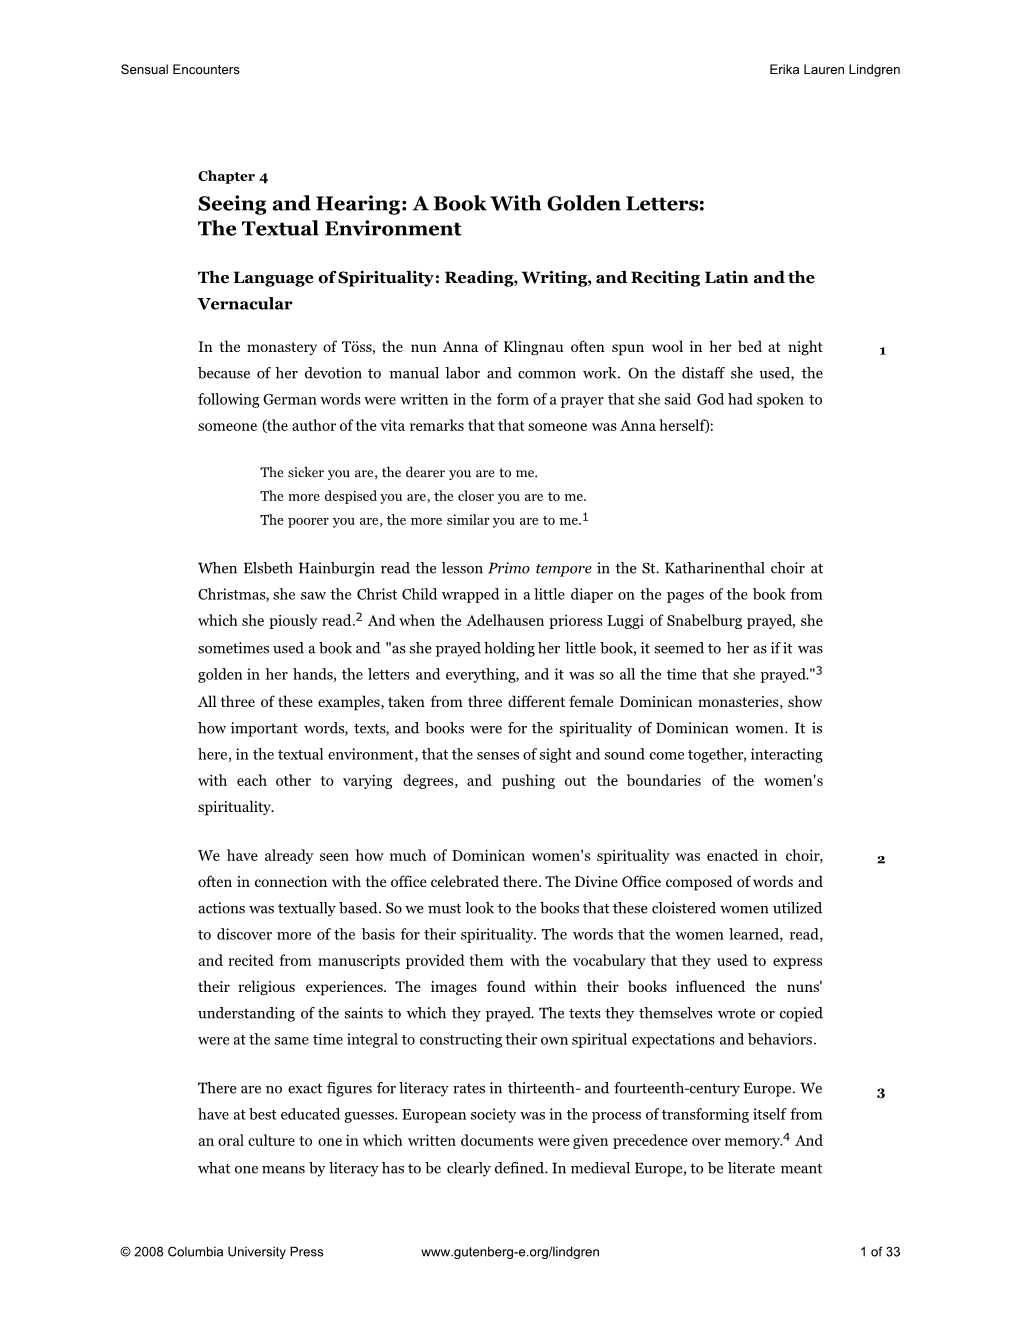 Chapter 4 Seeing and Hearing: a Book with Golden Letters: the Textual Environment